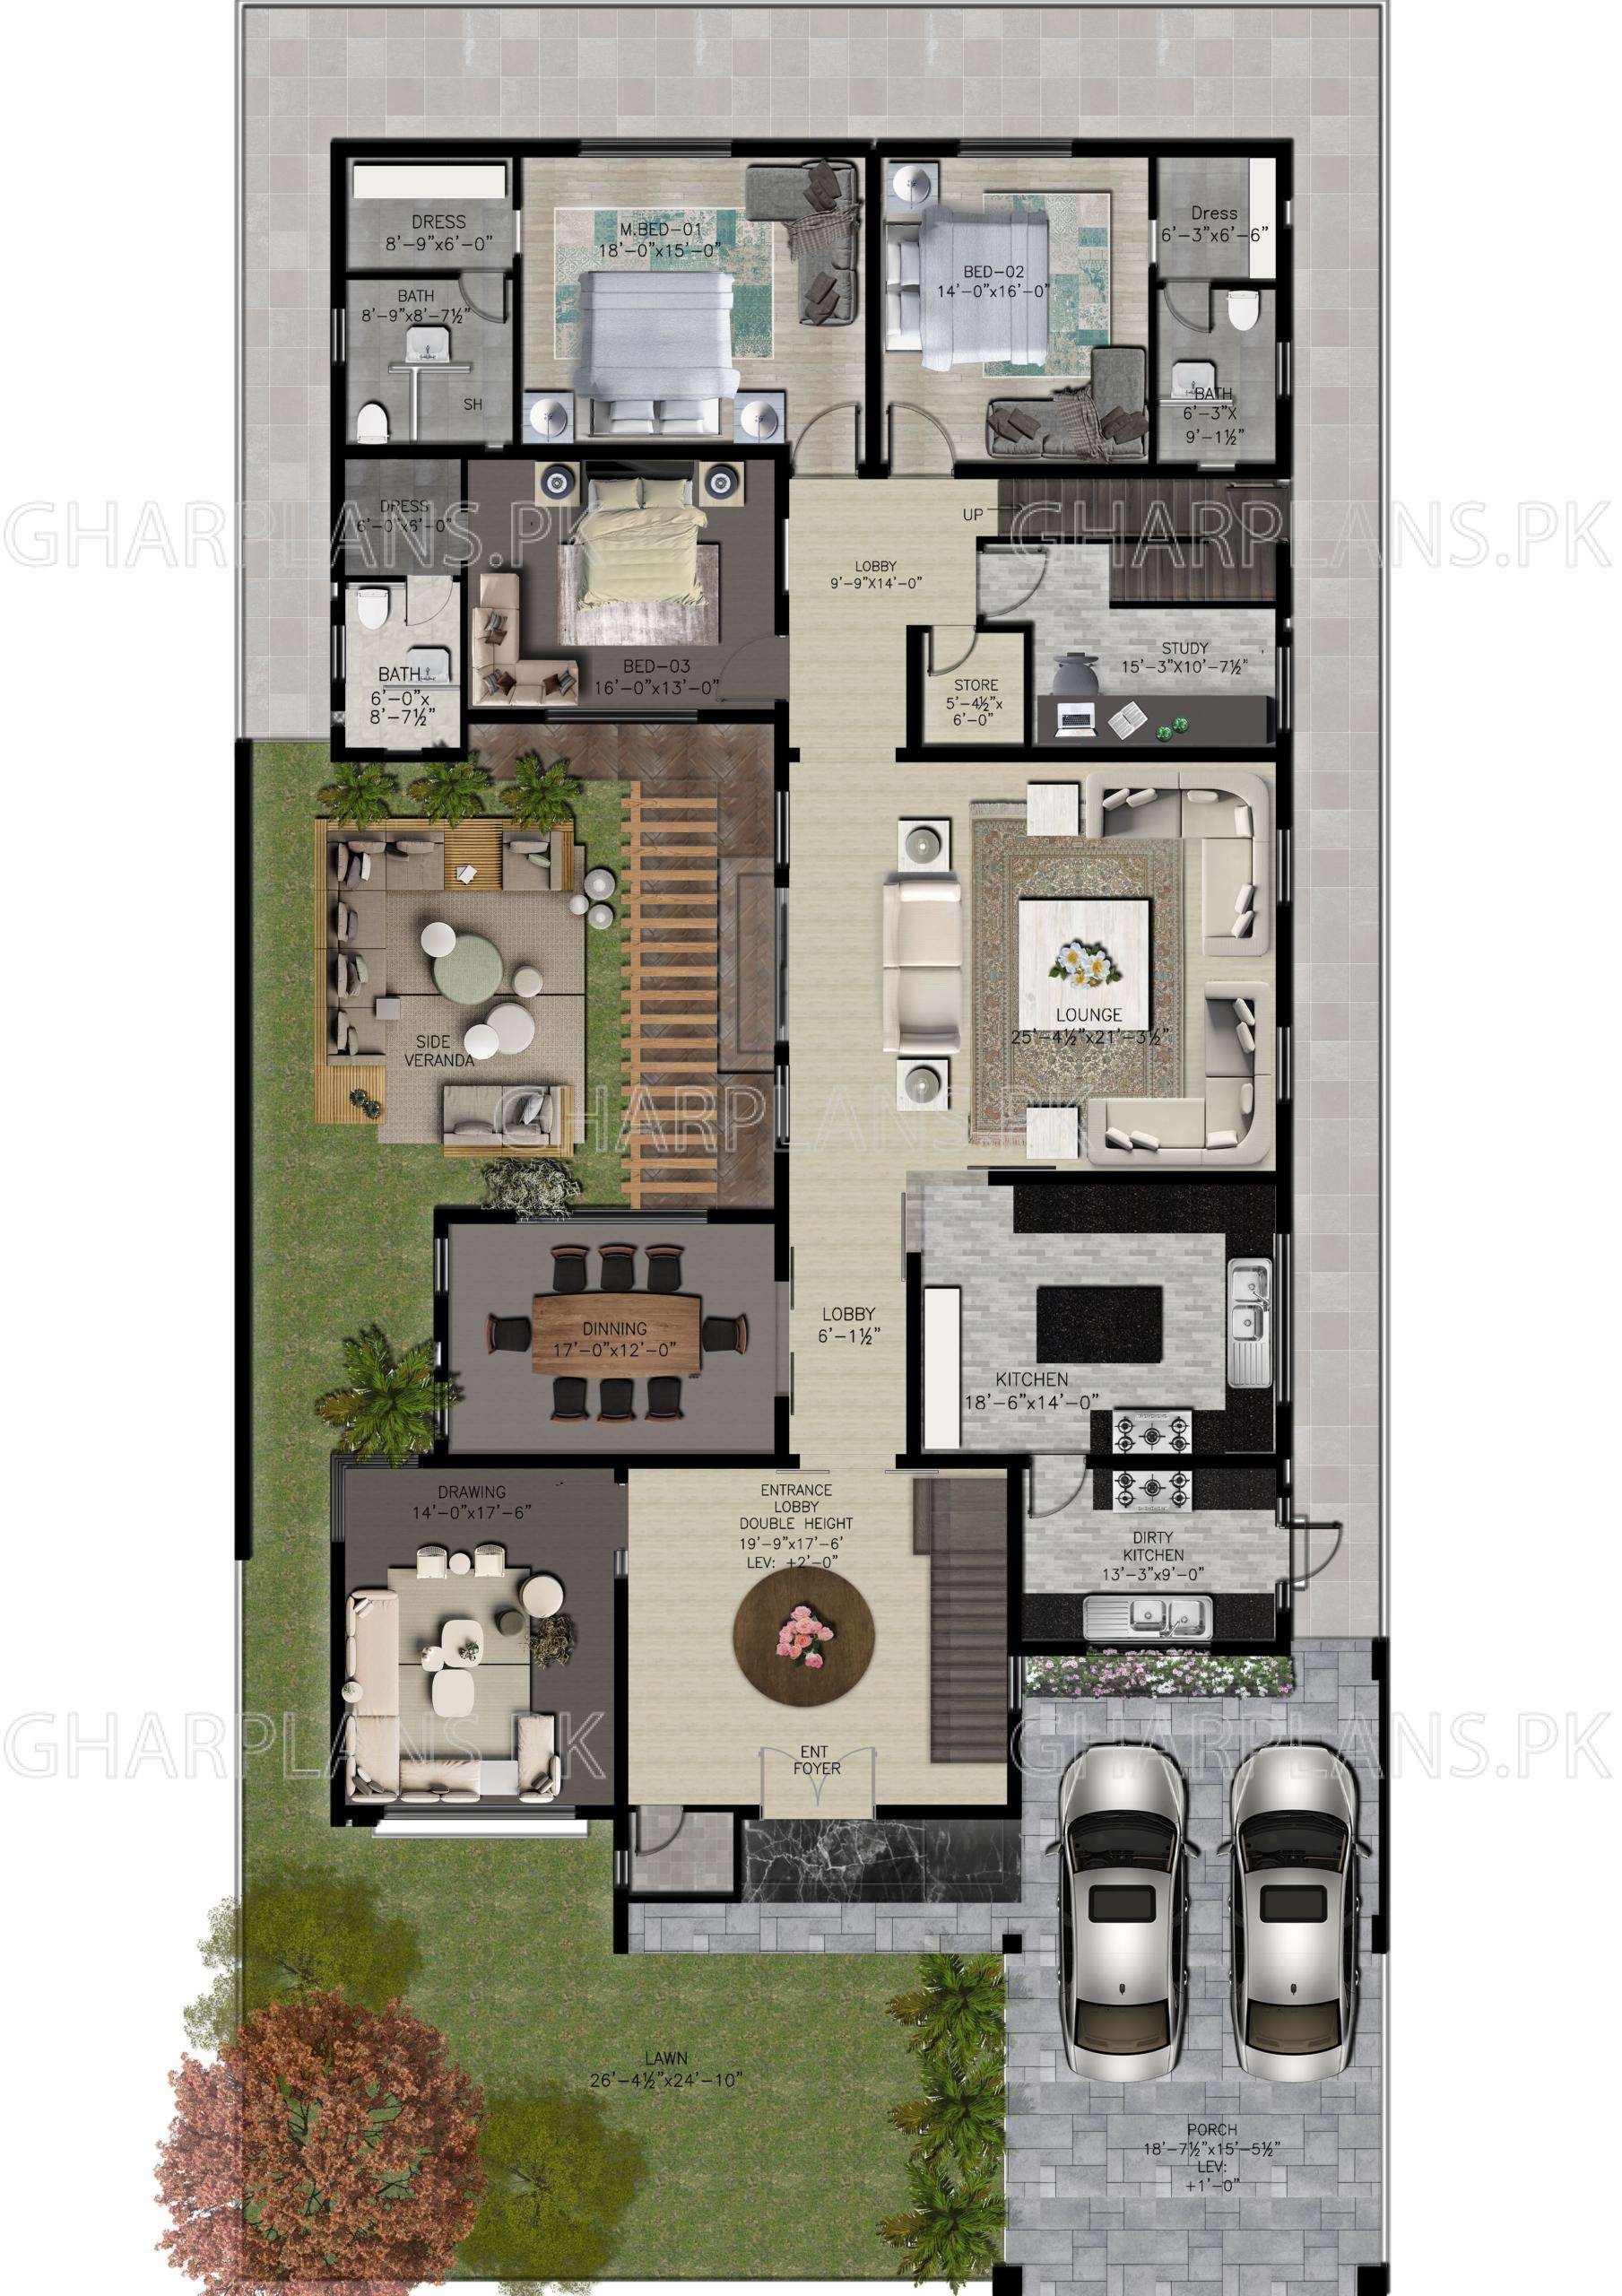 Design of 800 square yards or 32 marla house